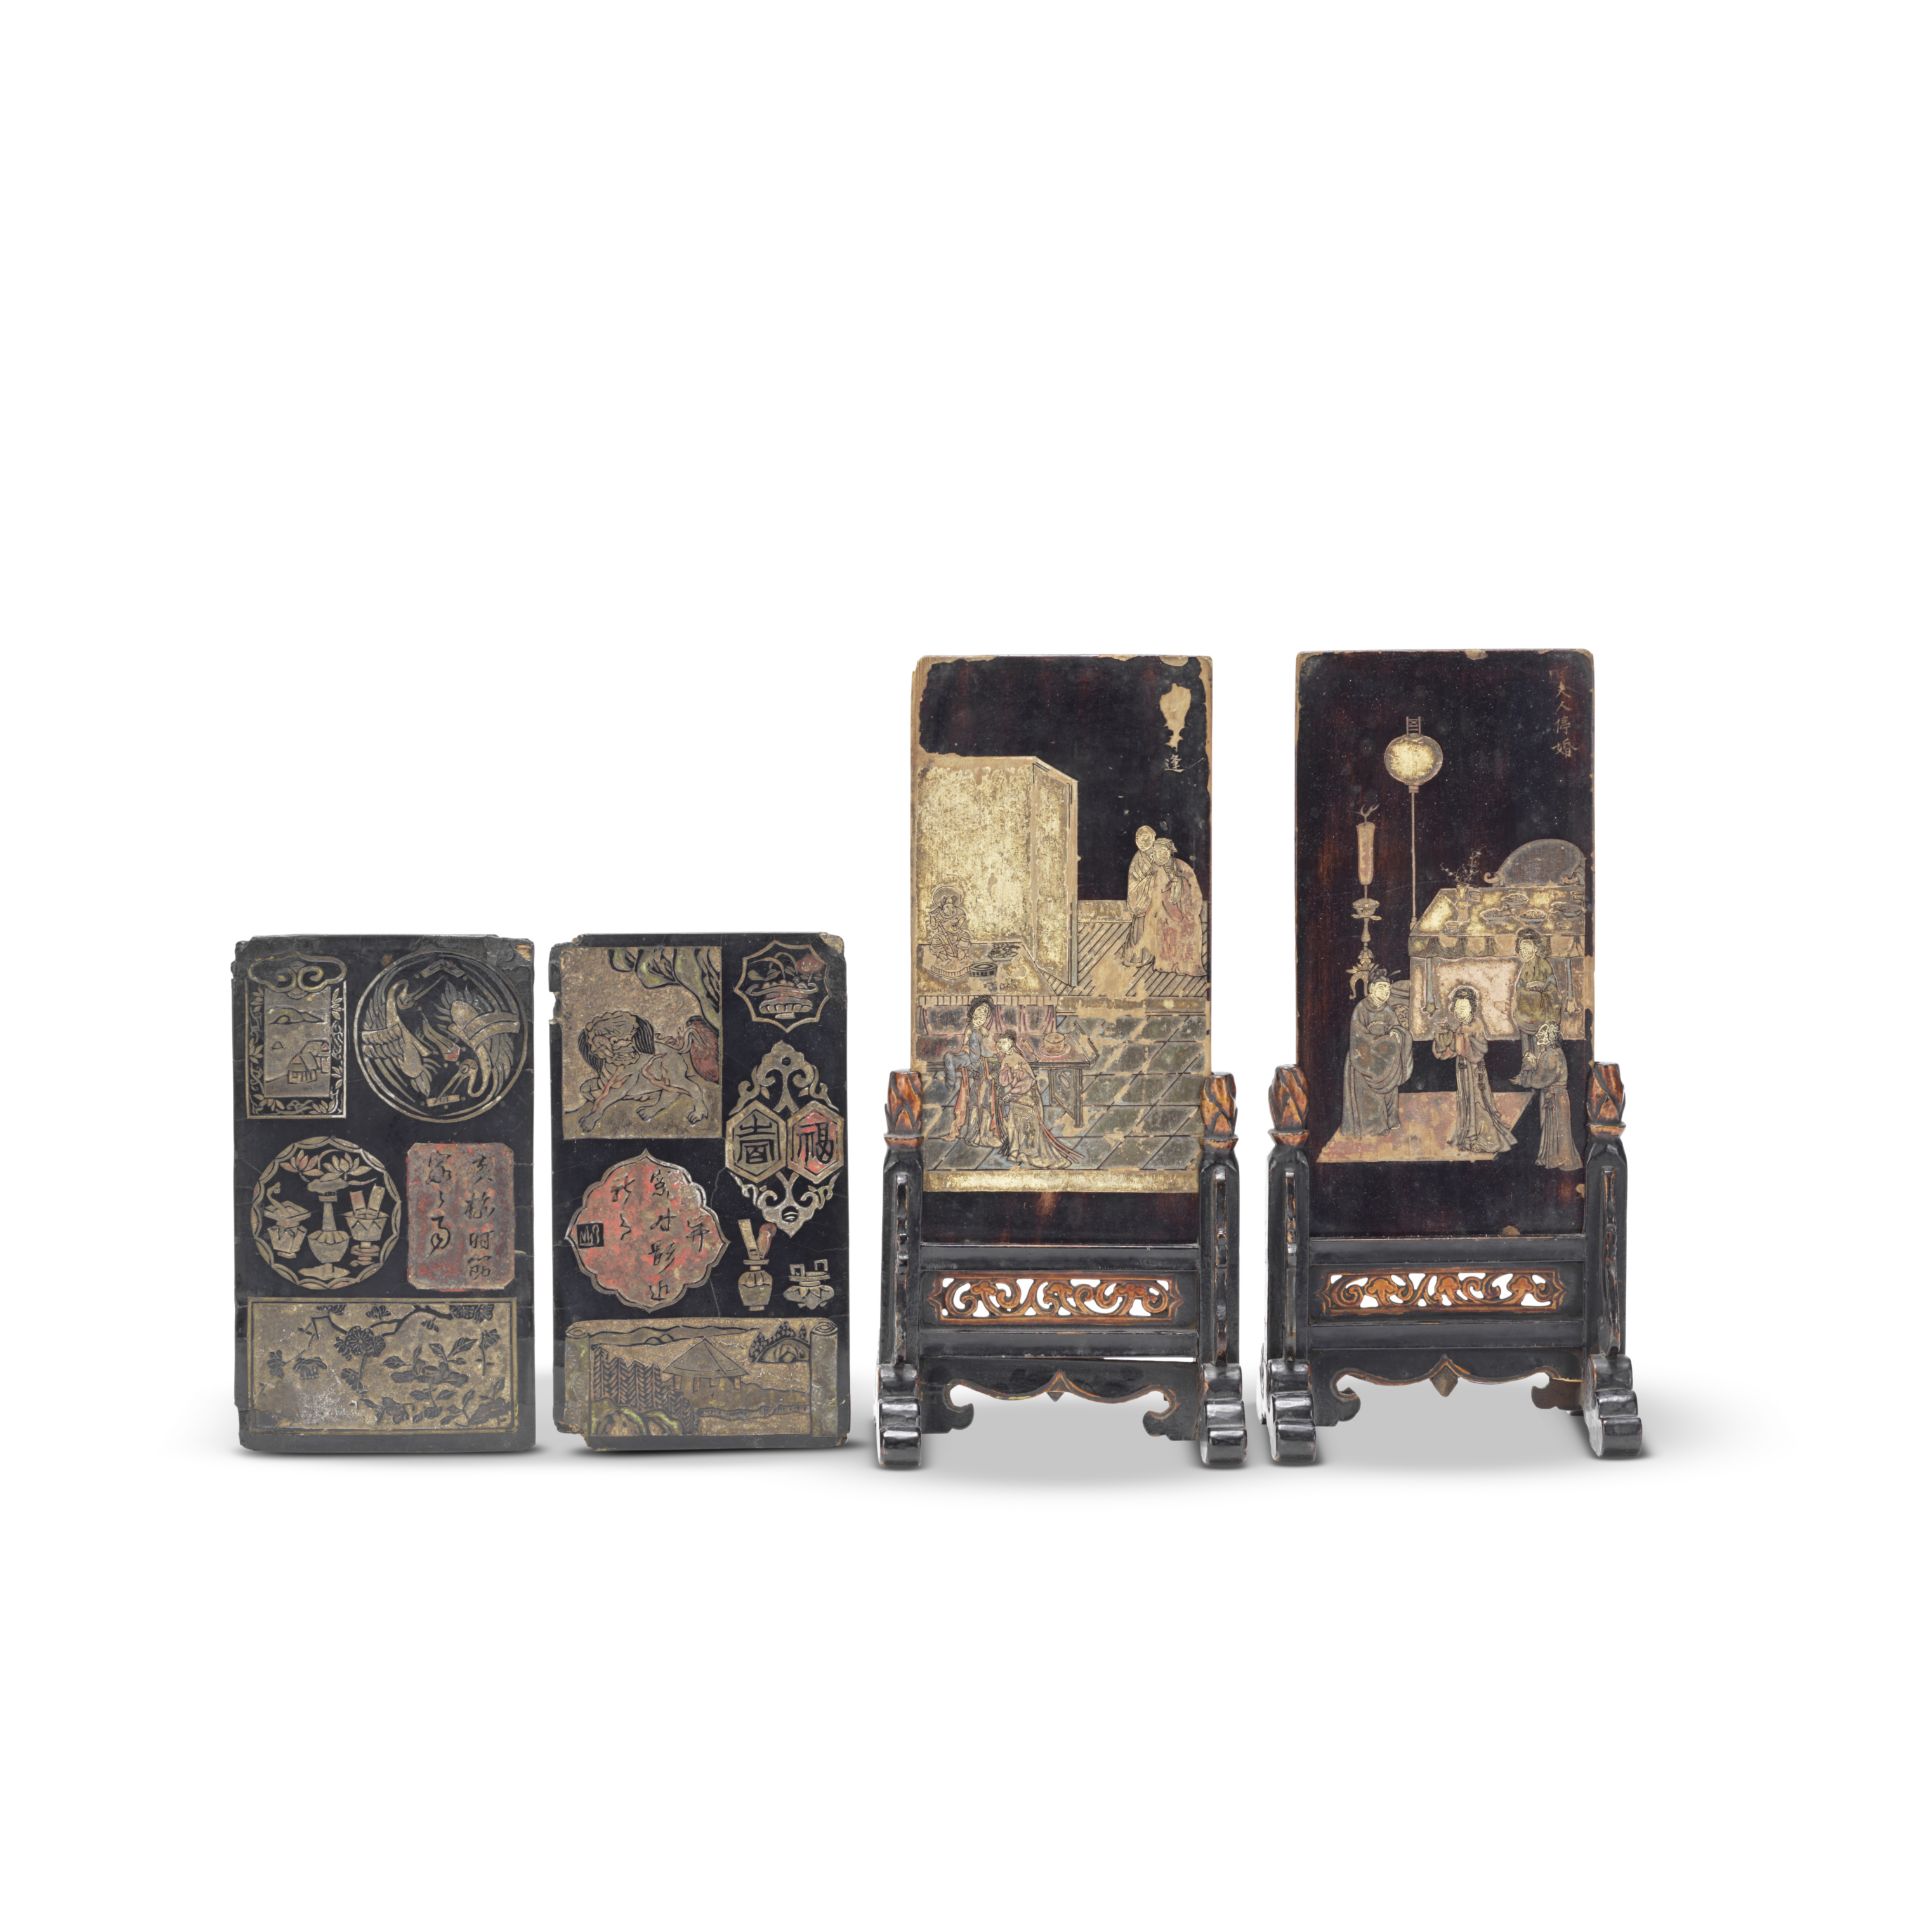 TWO PAIRS OF COROMANDEL LACQUER DOUBLE-SIDED PANELS, ONE PAIR MOUNTED AS TABLE SCREENS Kangxi